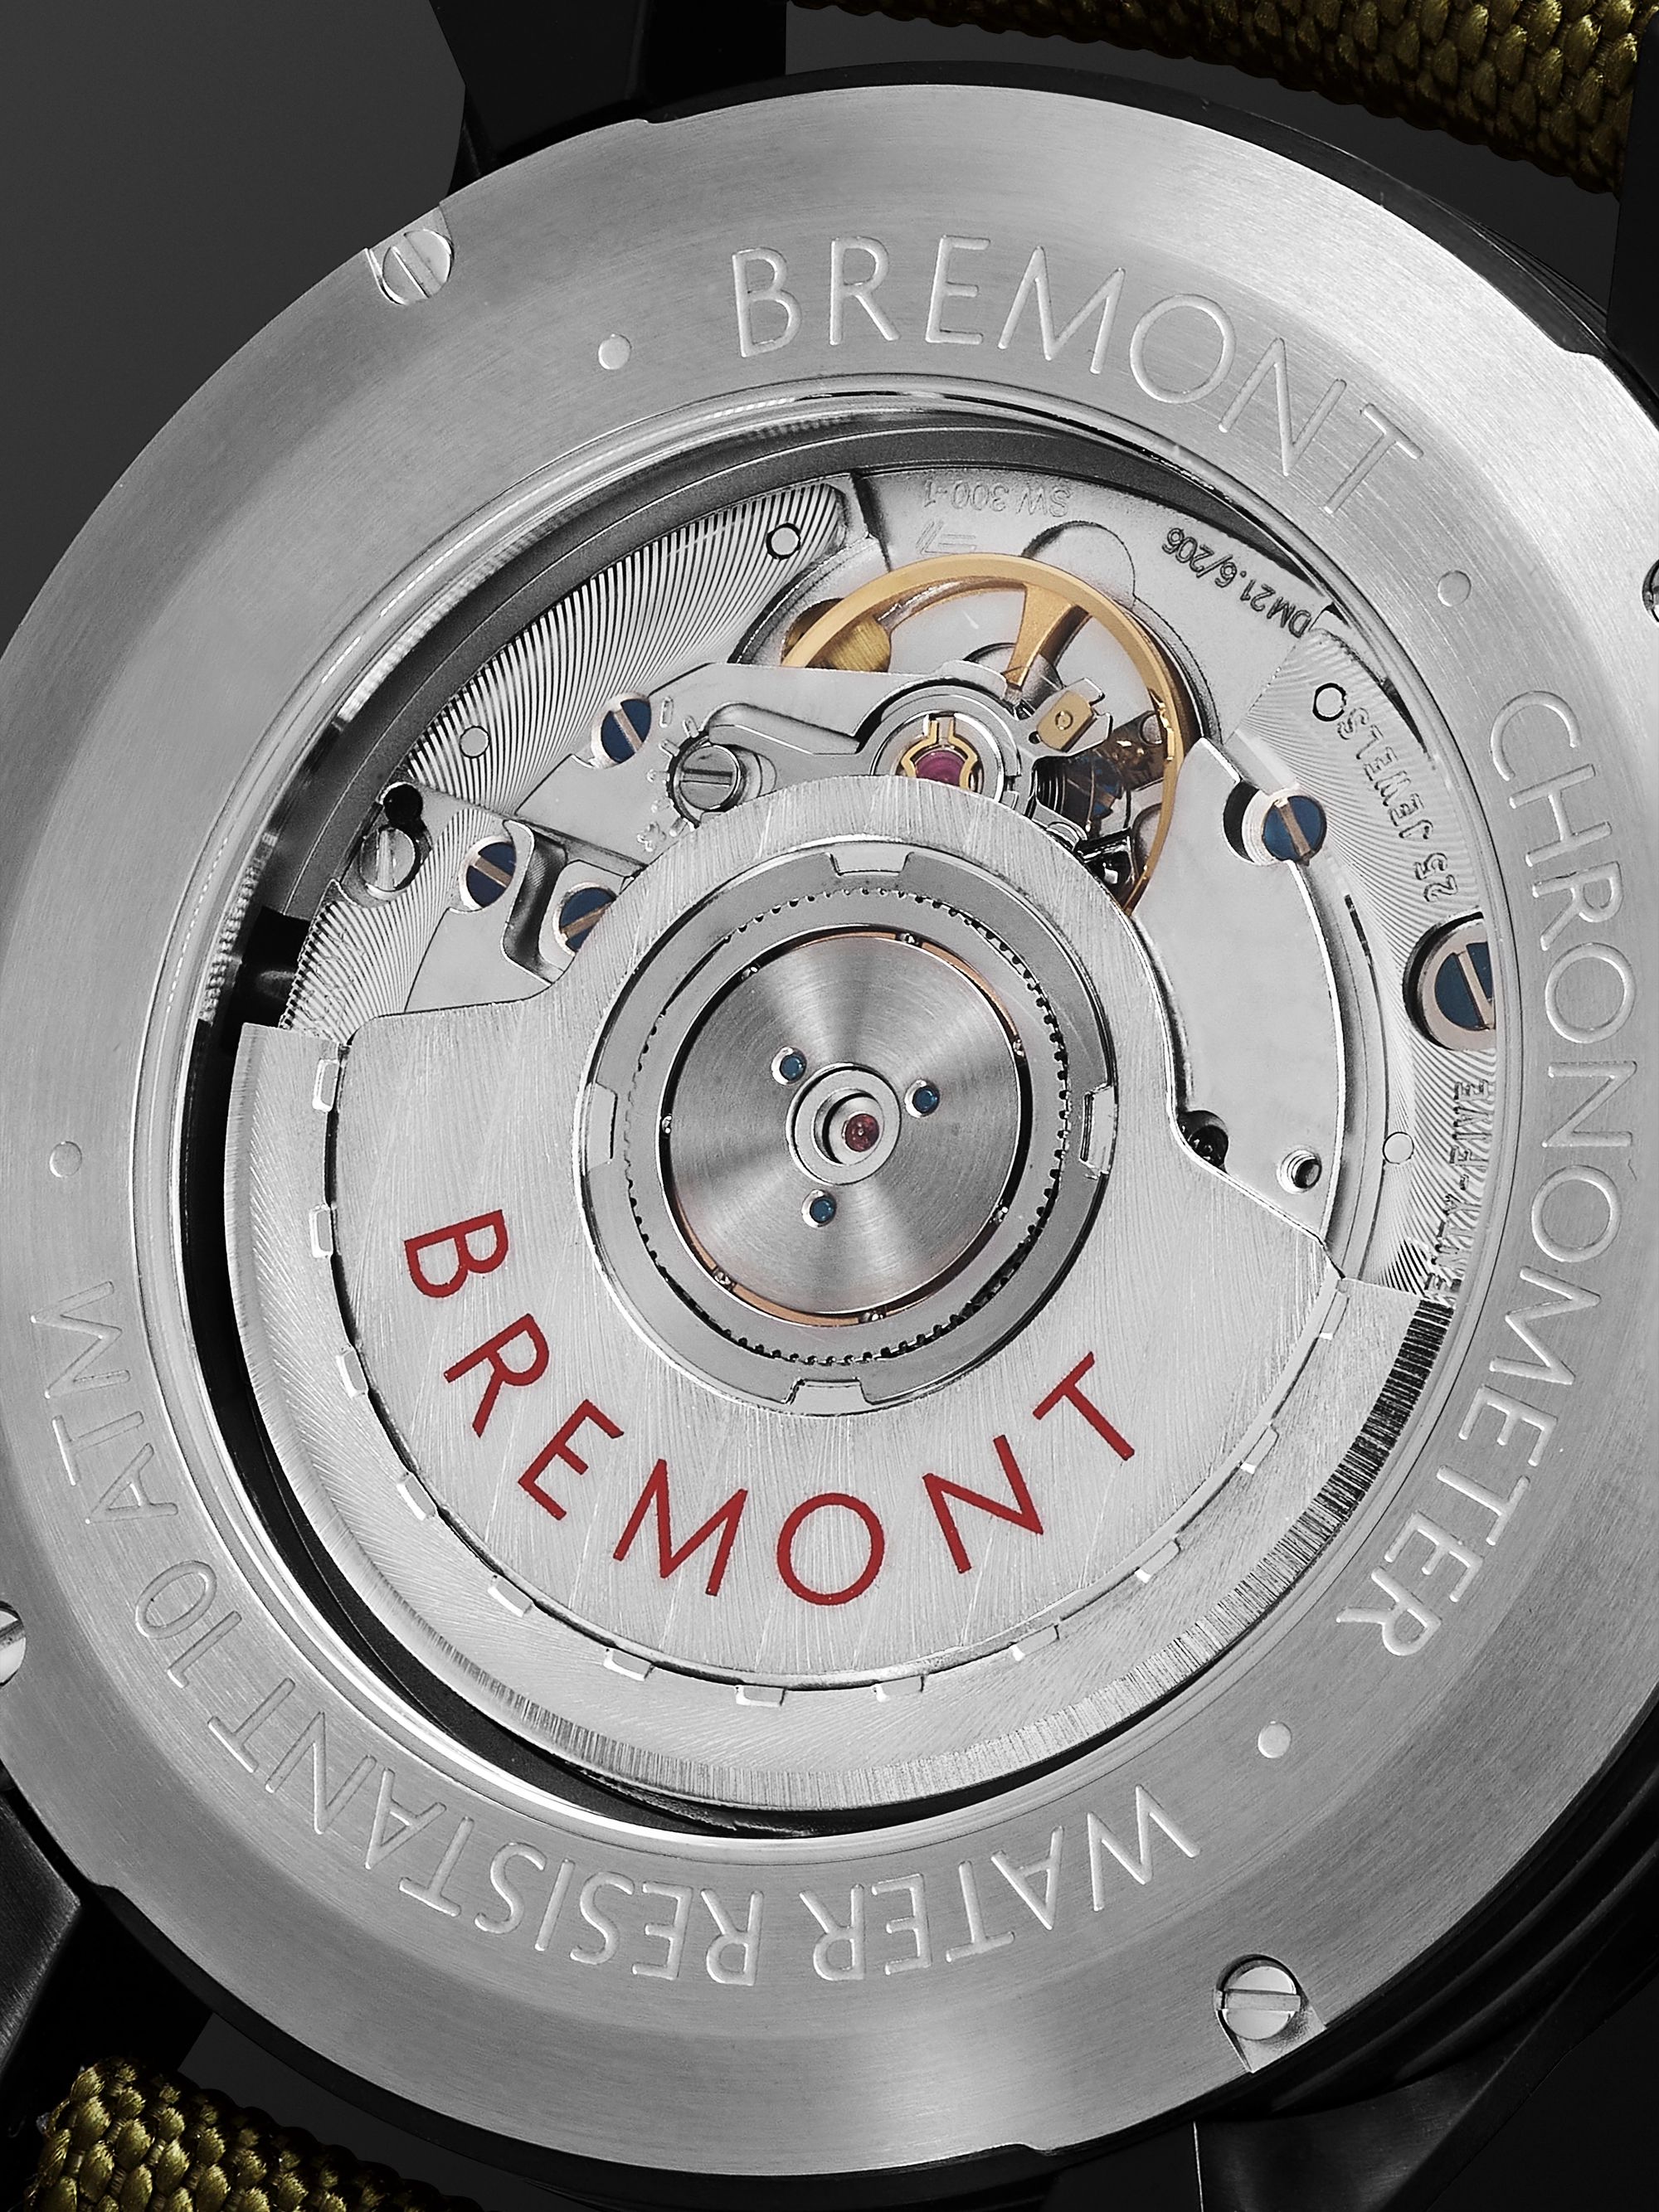 BREMONT Airco Mach 1 Jet Automatic 40mm Stainless Steel and Khaki Sailcloth Watch